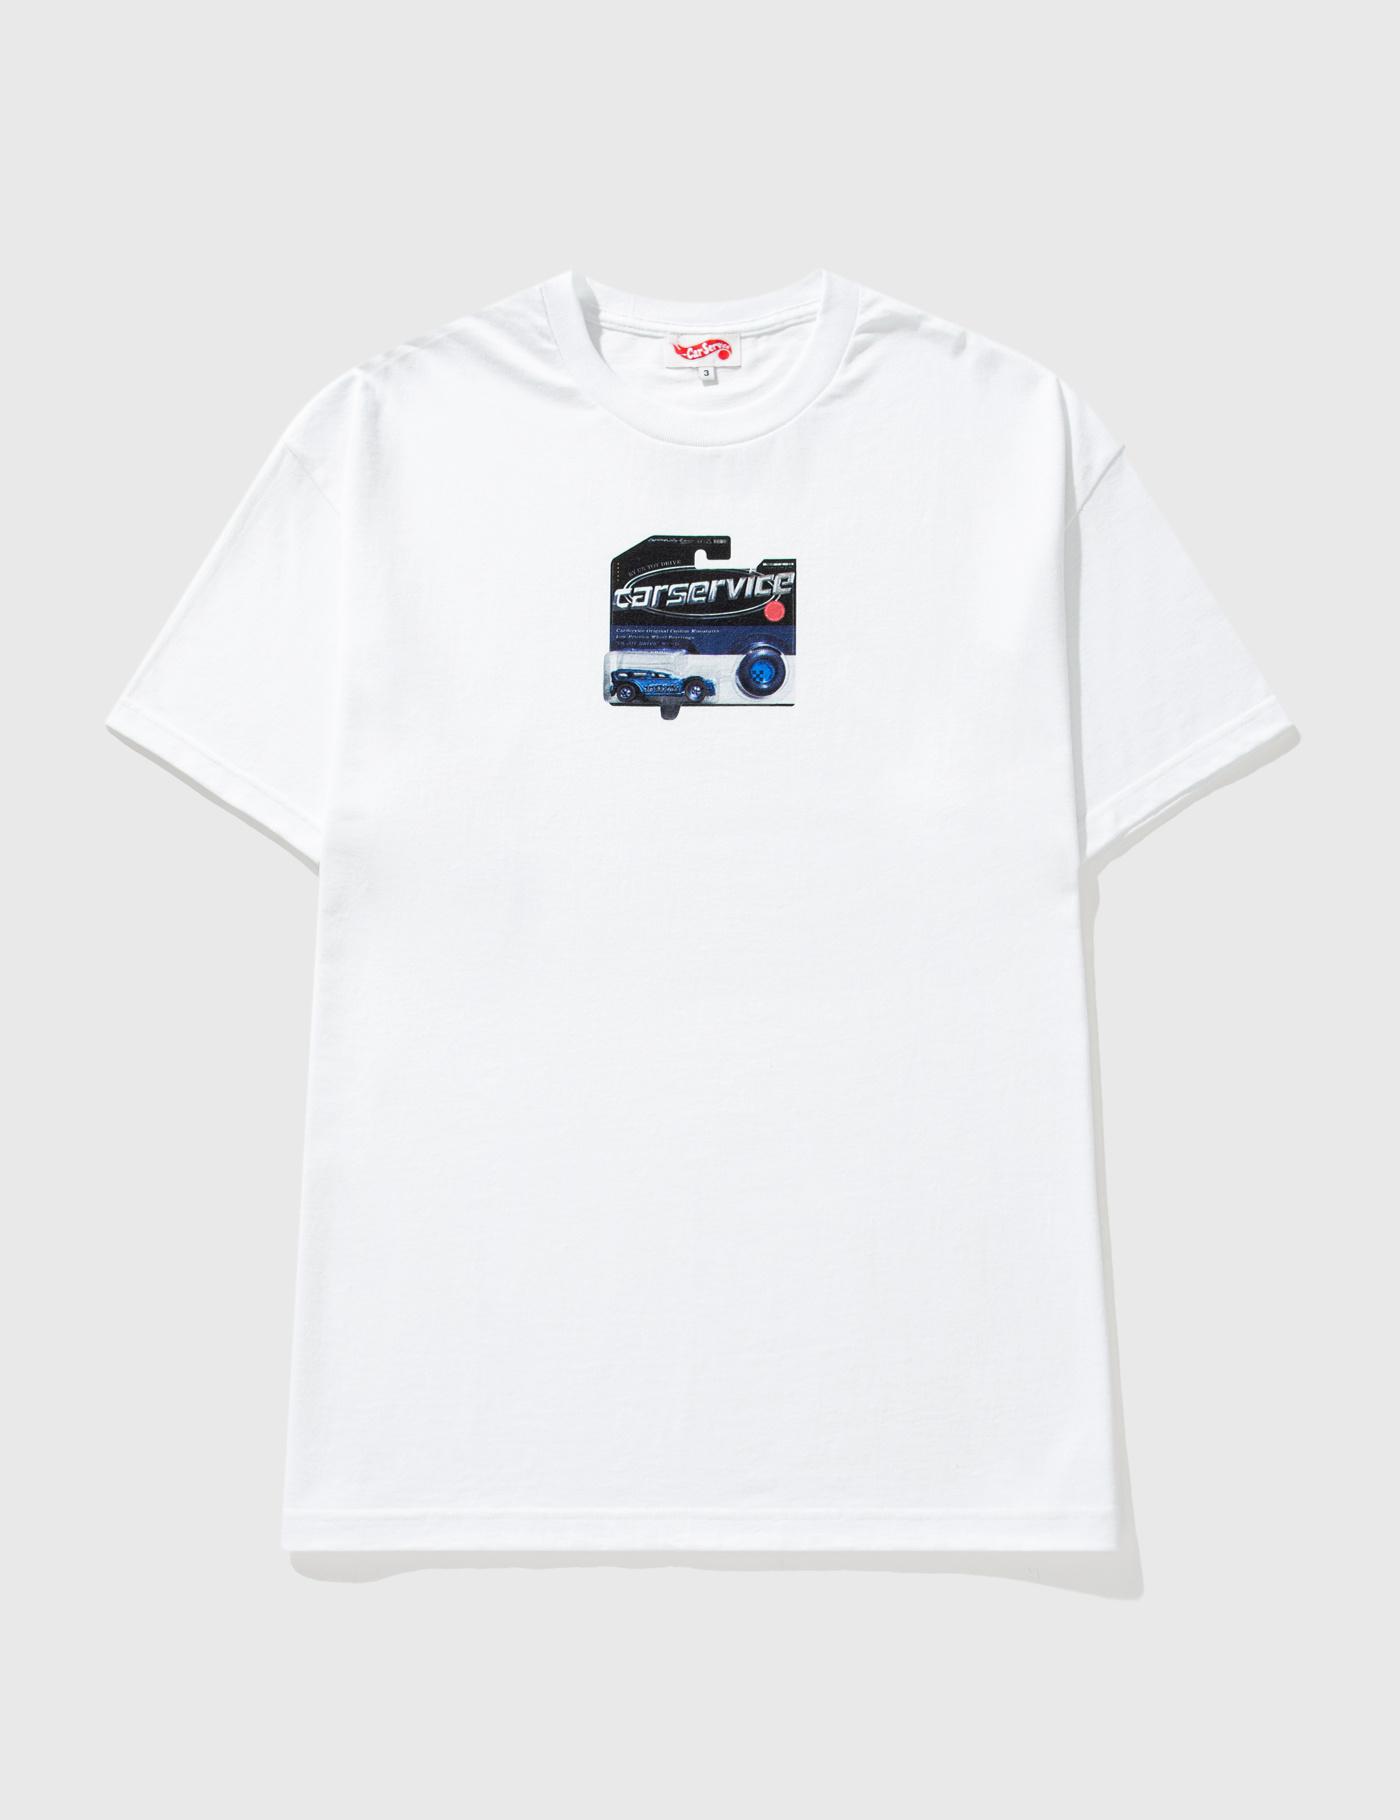 Package  T-SHIRT by CAR SERVICE